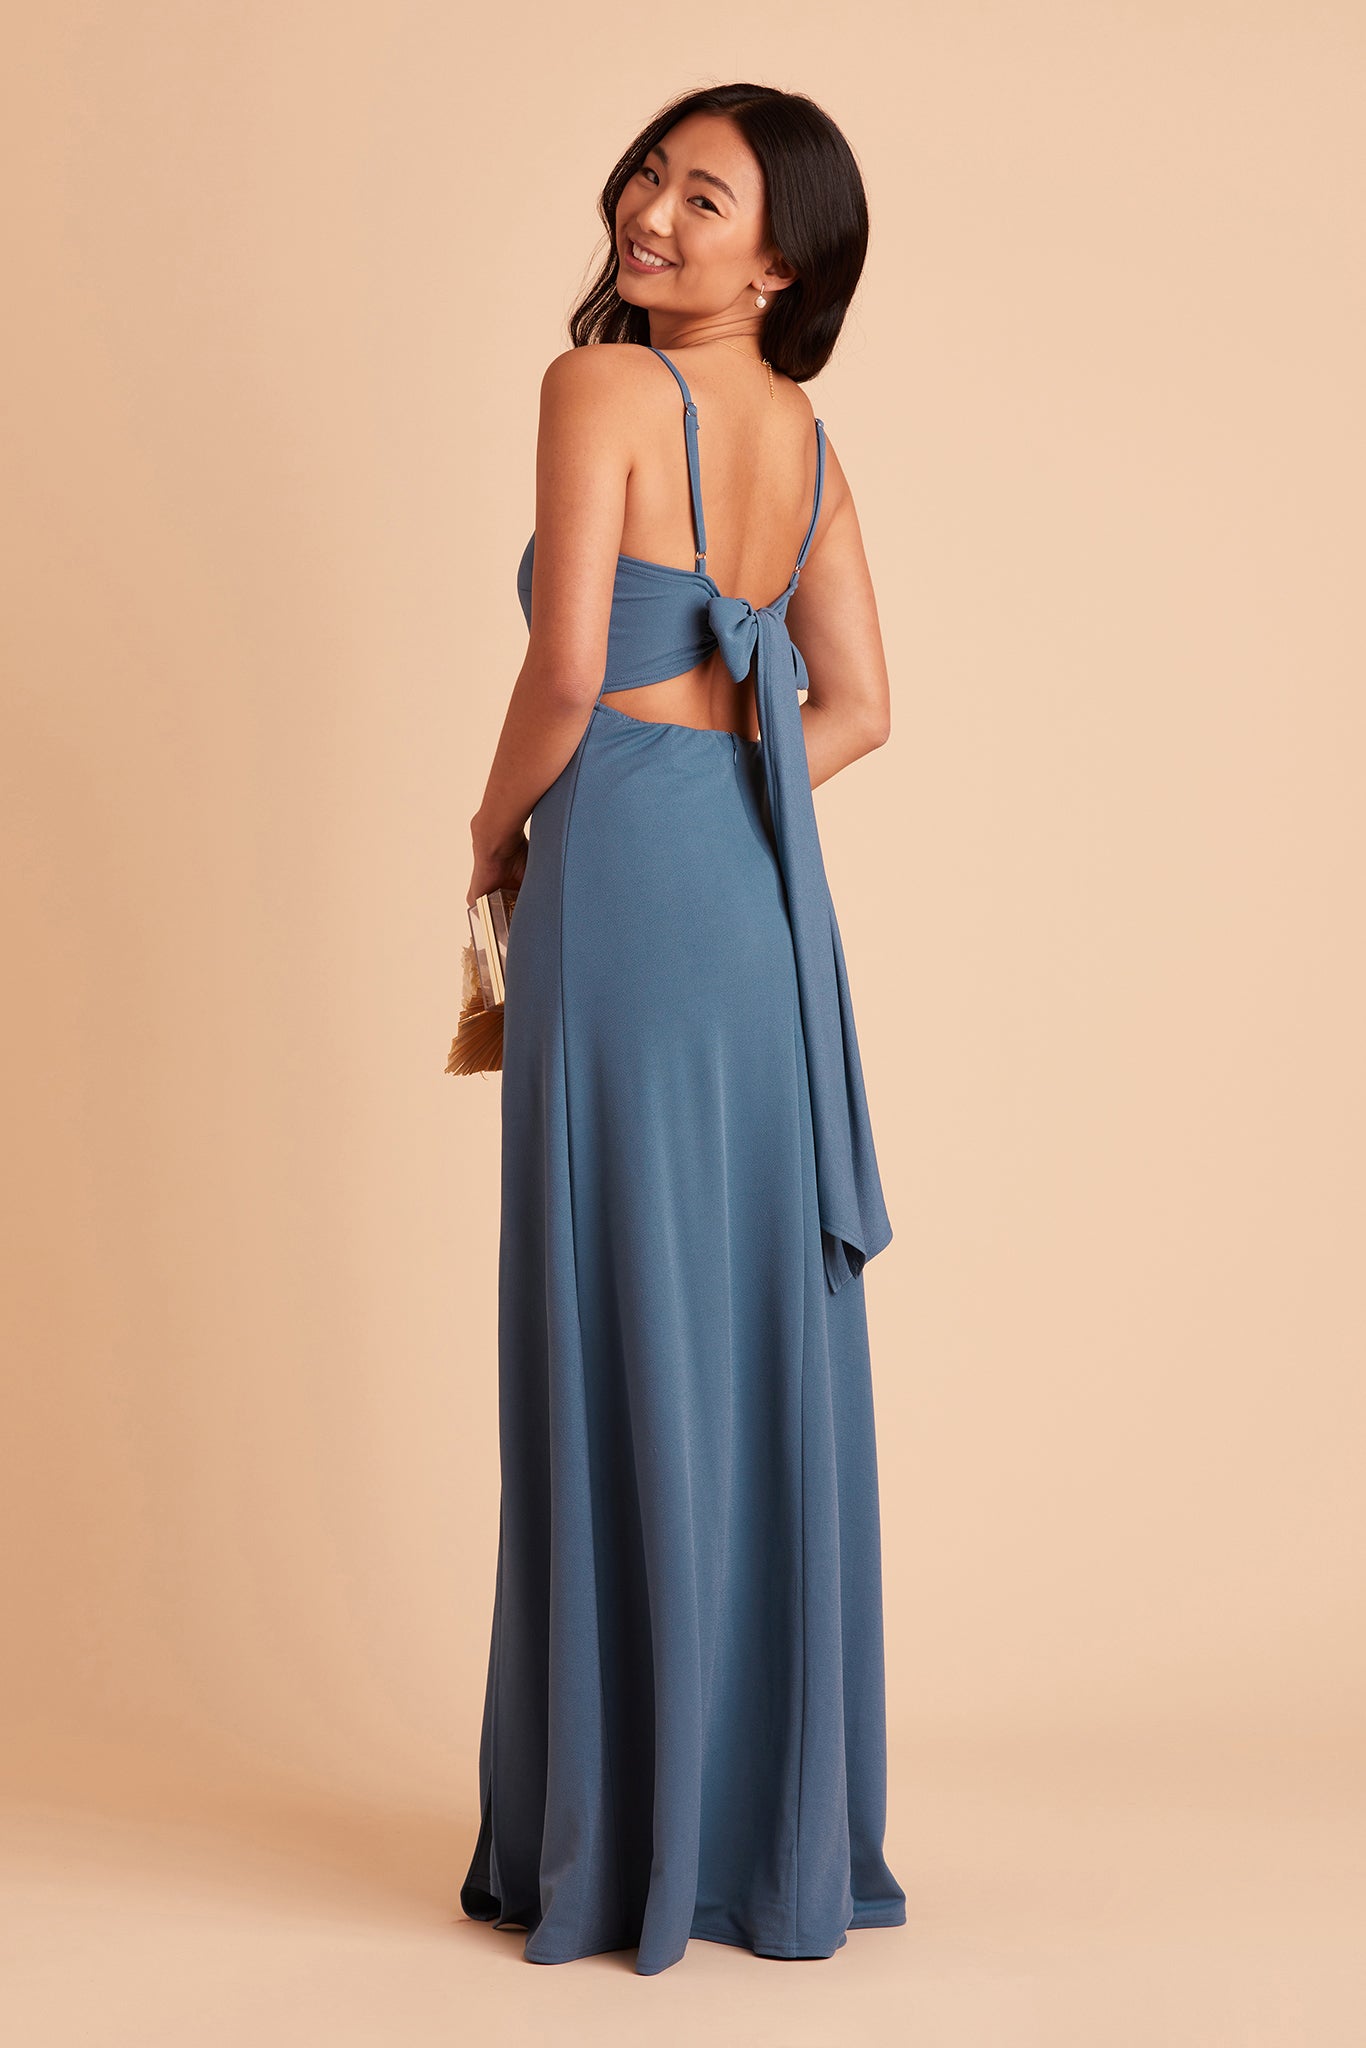 Benny bridesmaid dress in twilight crepe by Birdy Grey, side view